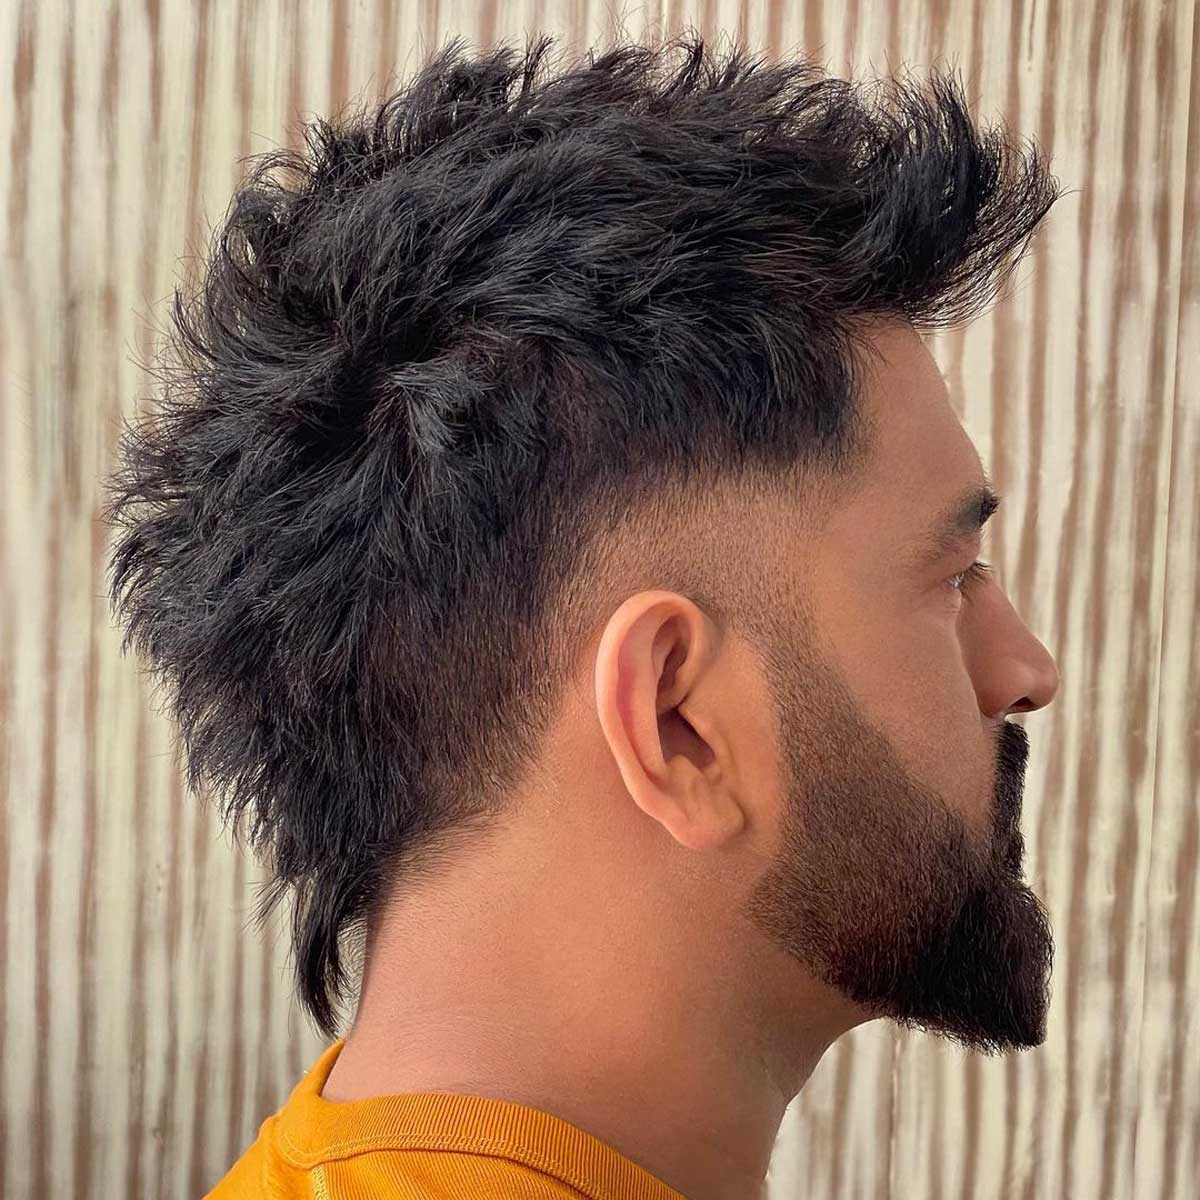 MS Dhoni Hairstyle Archives - The Cricket Lounge